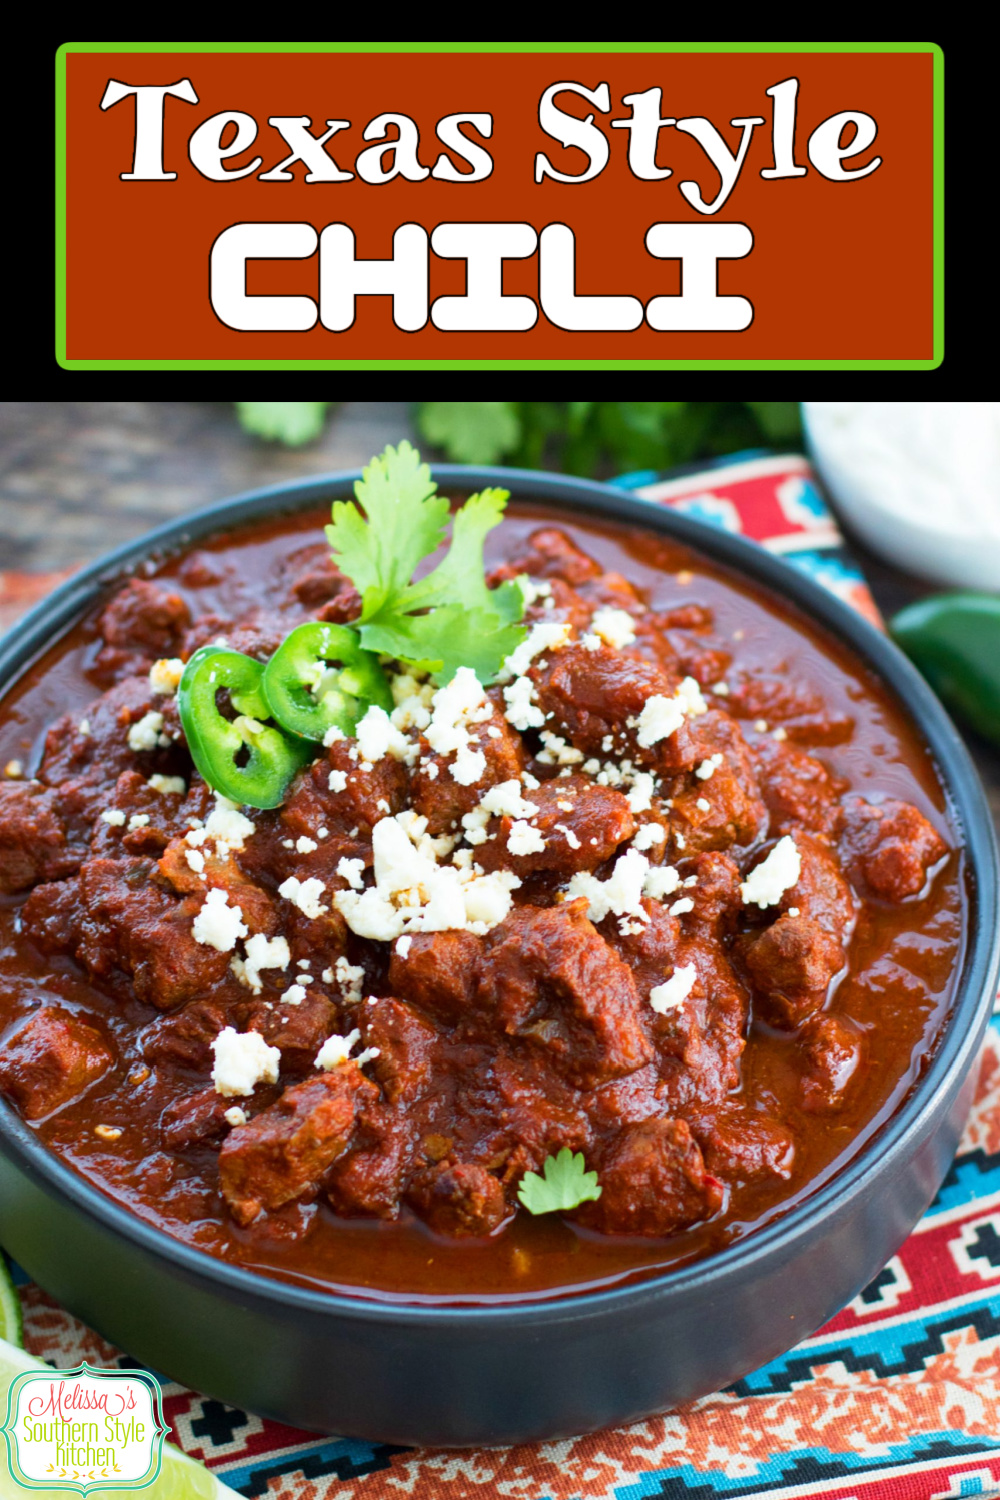 This rich and hearty all beef Texas Style Chili is packed with flavor and color to boot #texaschili #chilirecipes #chili #beefrecipes #chuckroastrecipes #nobeanschilirecipe #dinner #dinnerideas #southernfood #southernrecipes via @melissasssk